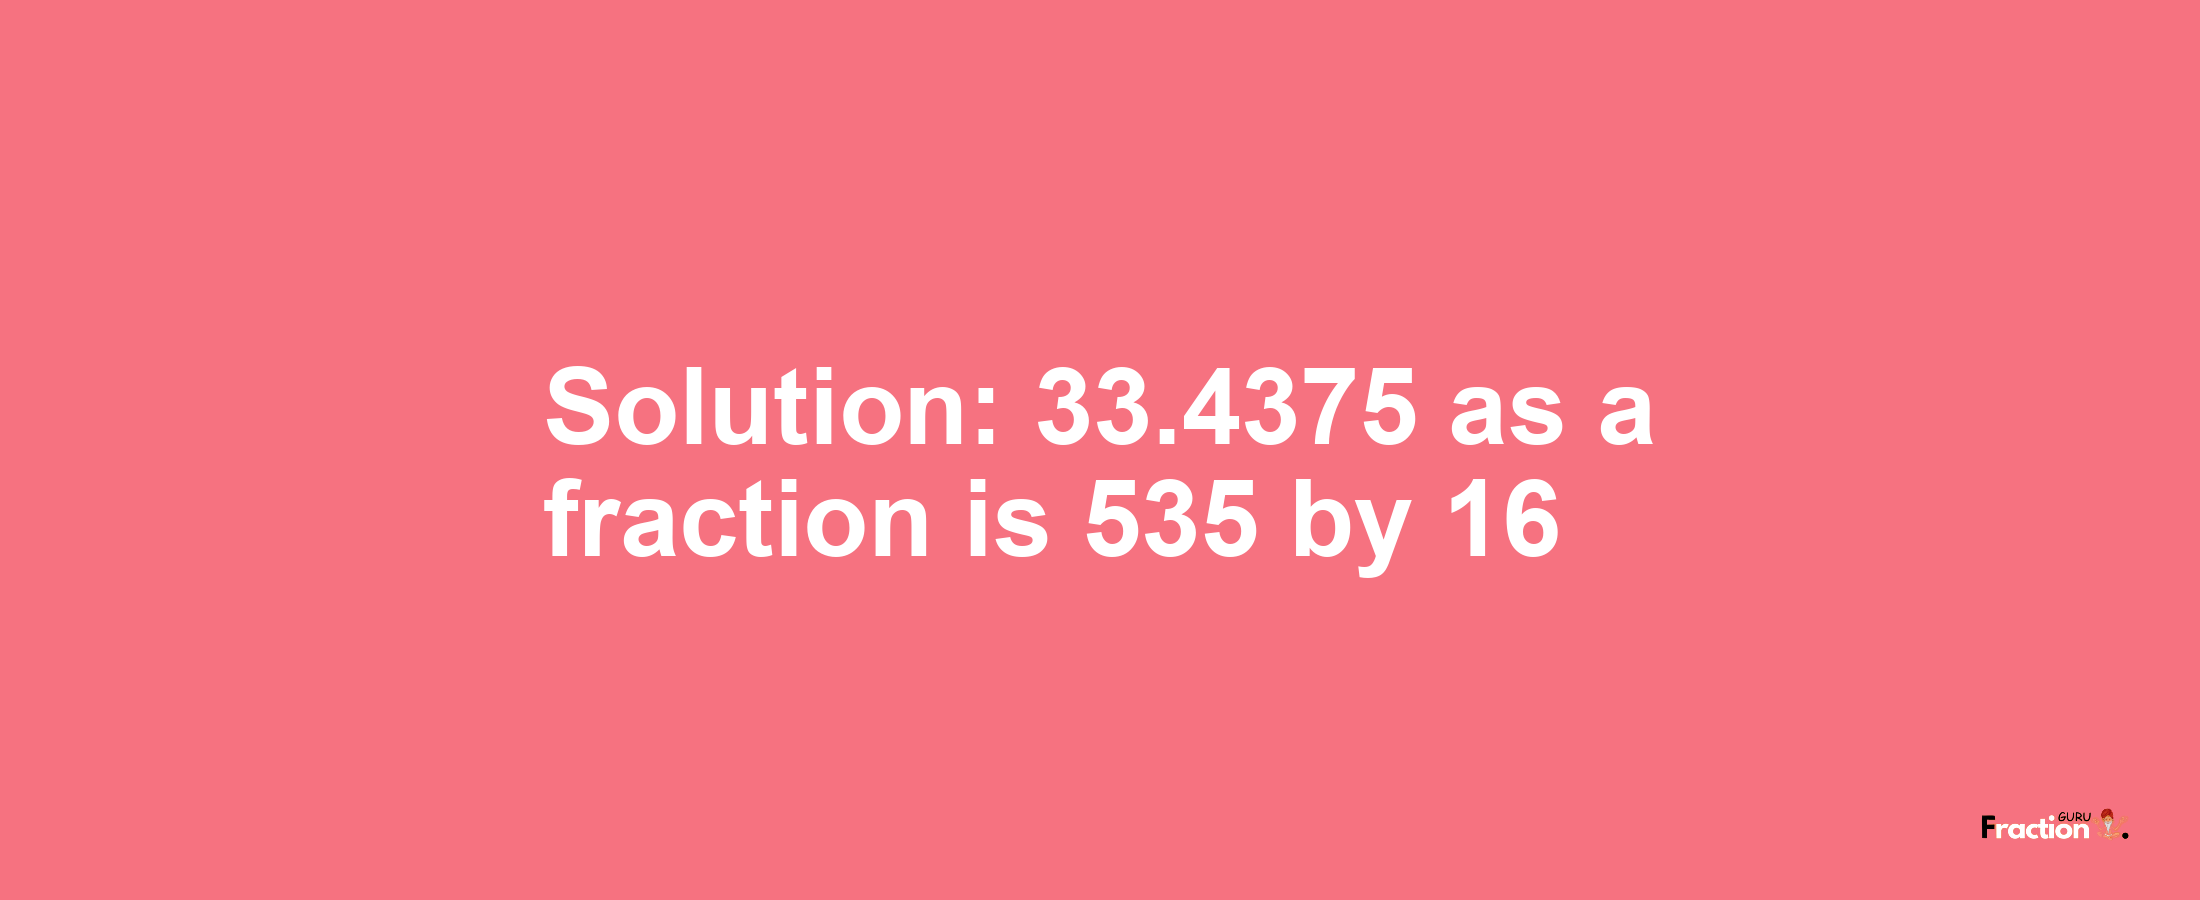 Solution:33.4375 as a fraction is 535/16